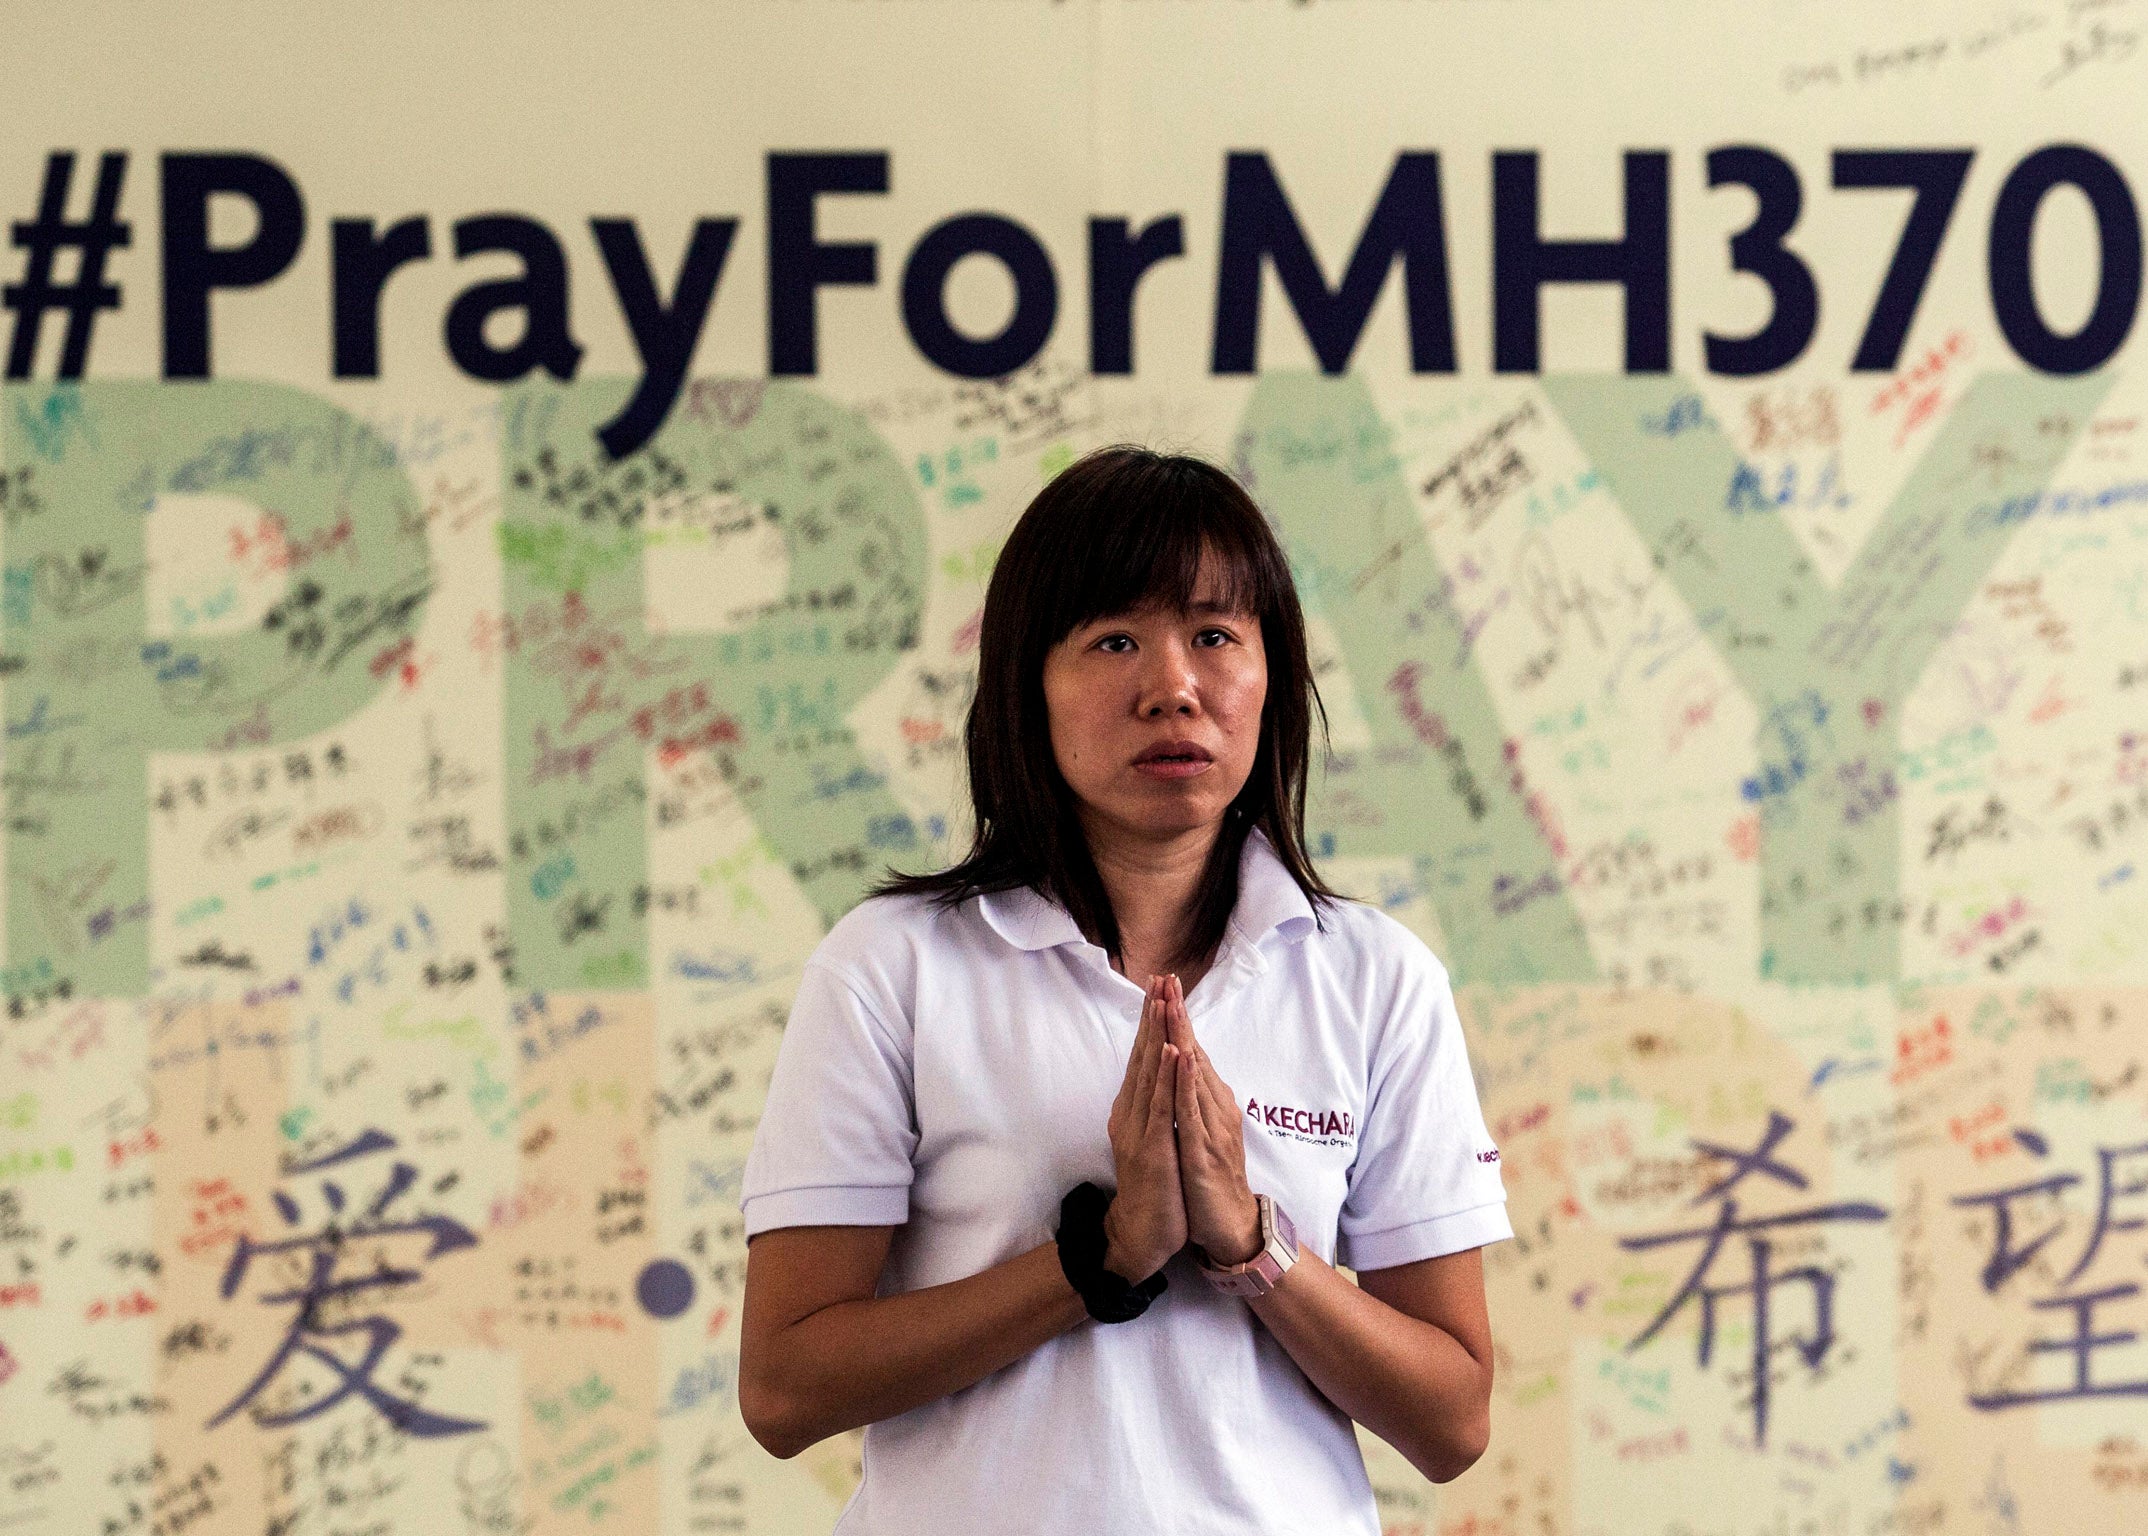 A Buddist devotee offers prayers for the missing Malaysian Airline plane MH370 in Bentong, Pahang, Malaysia